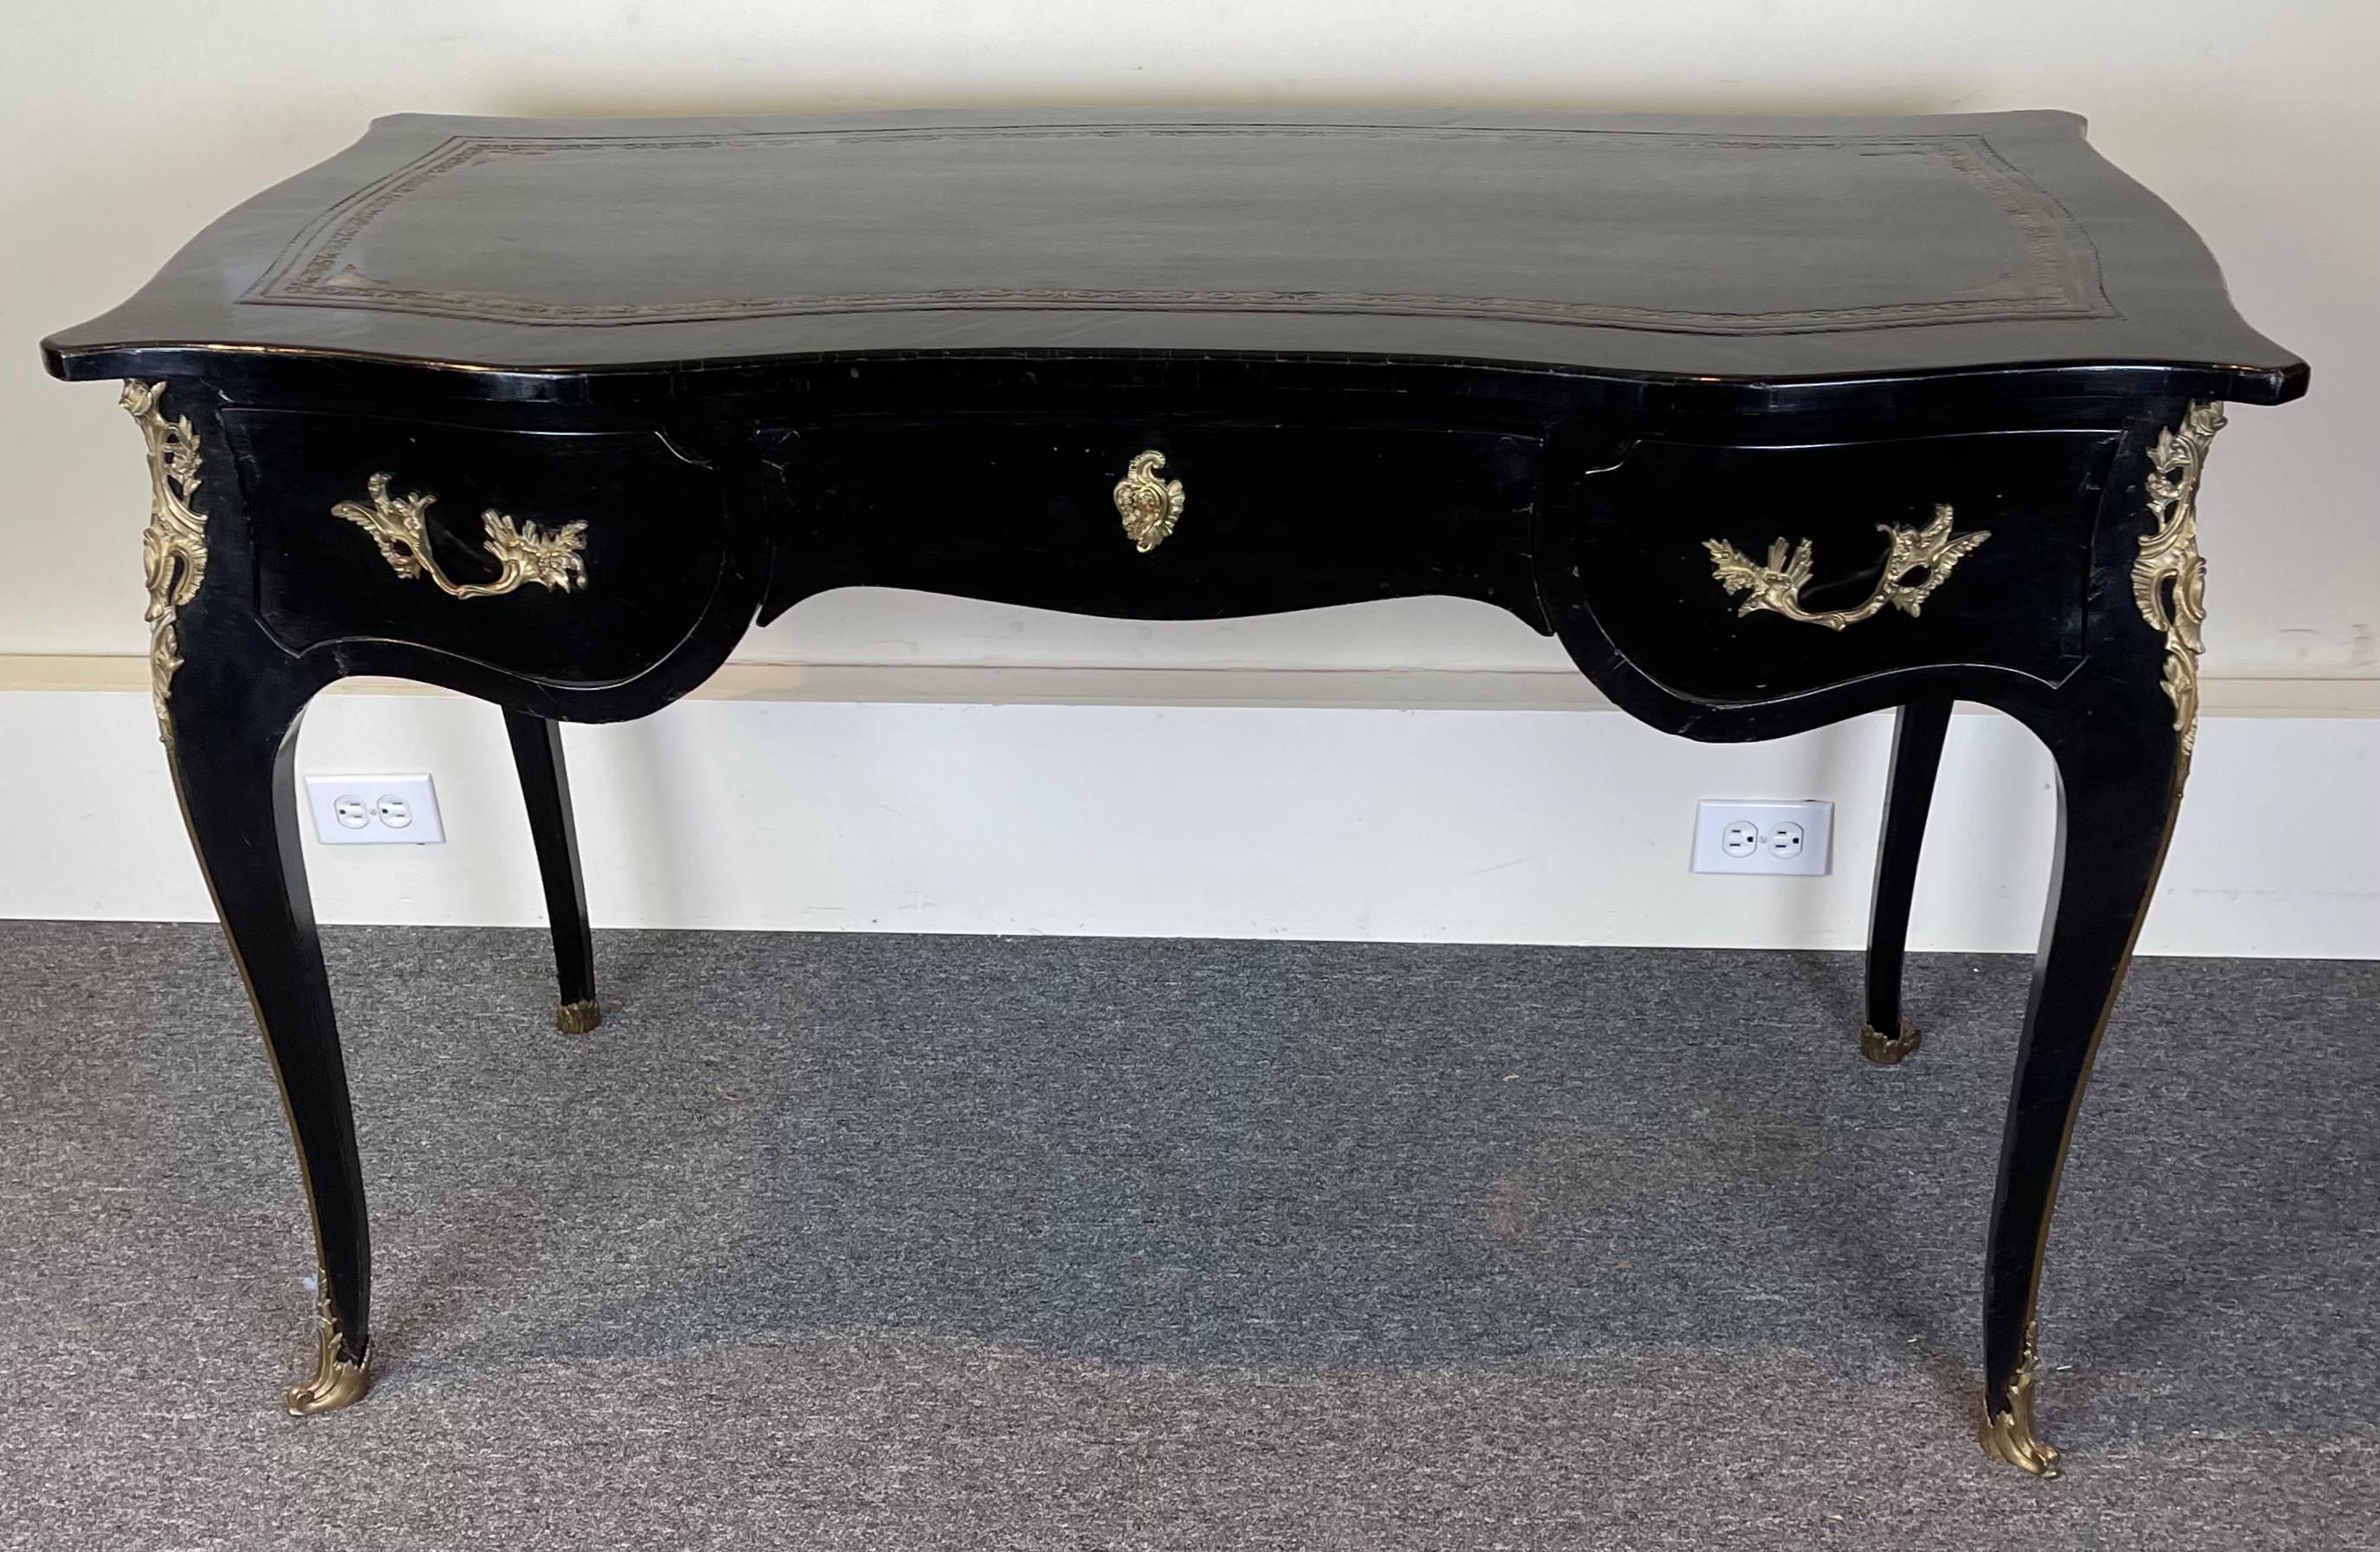 A late 18th C. French Louis XVI ebonized desk with inset tooled leather top above three drawers with cabriole legs accented with gilt bronze mounts.